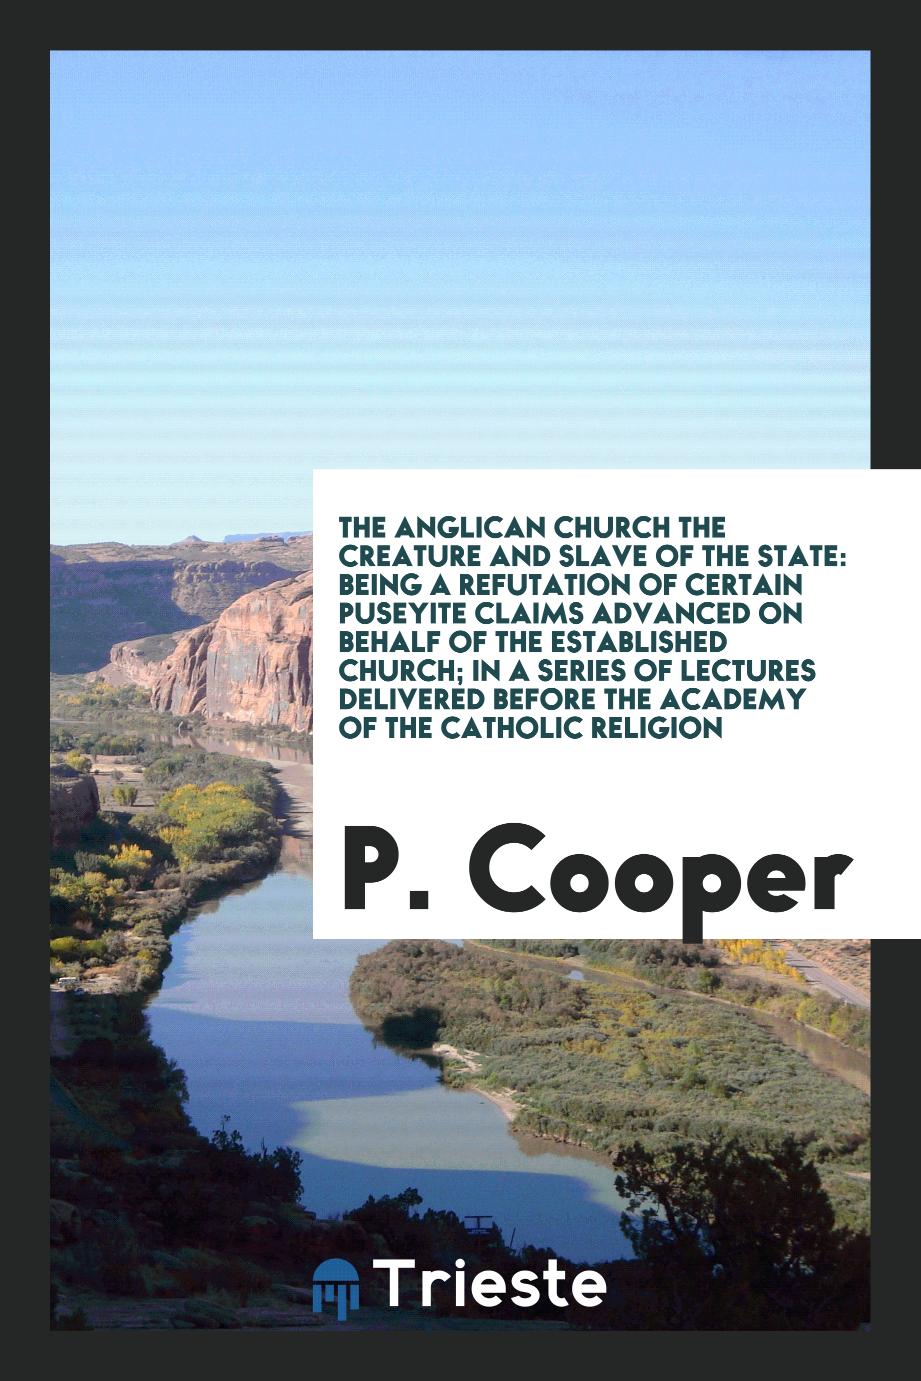 The Anglican Church the creature and slave of the state: being a refutation of certain Puseyite claims advanced on behalf of the established church; in a series of lectures delivered before the Academy of the Catholic Religion